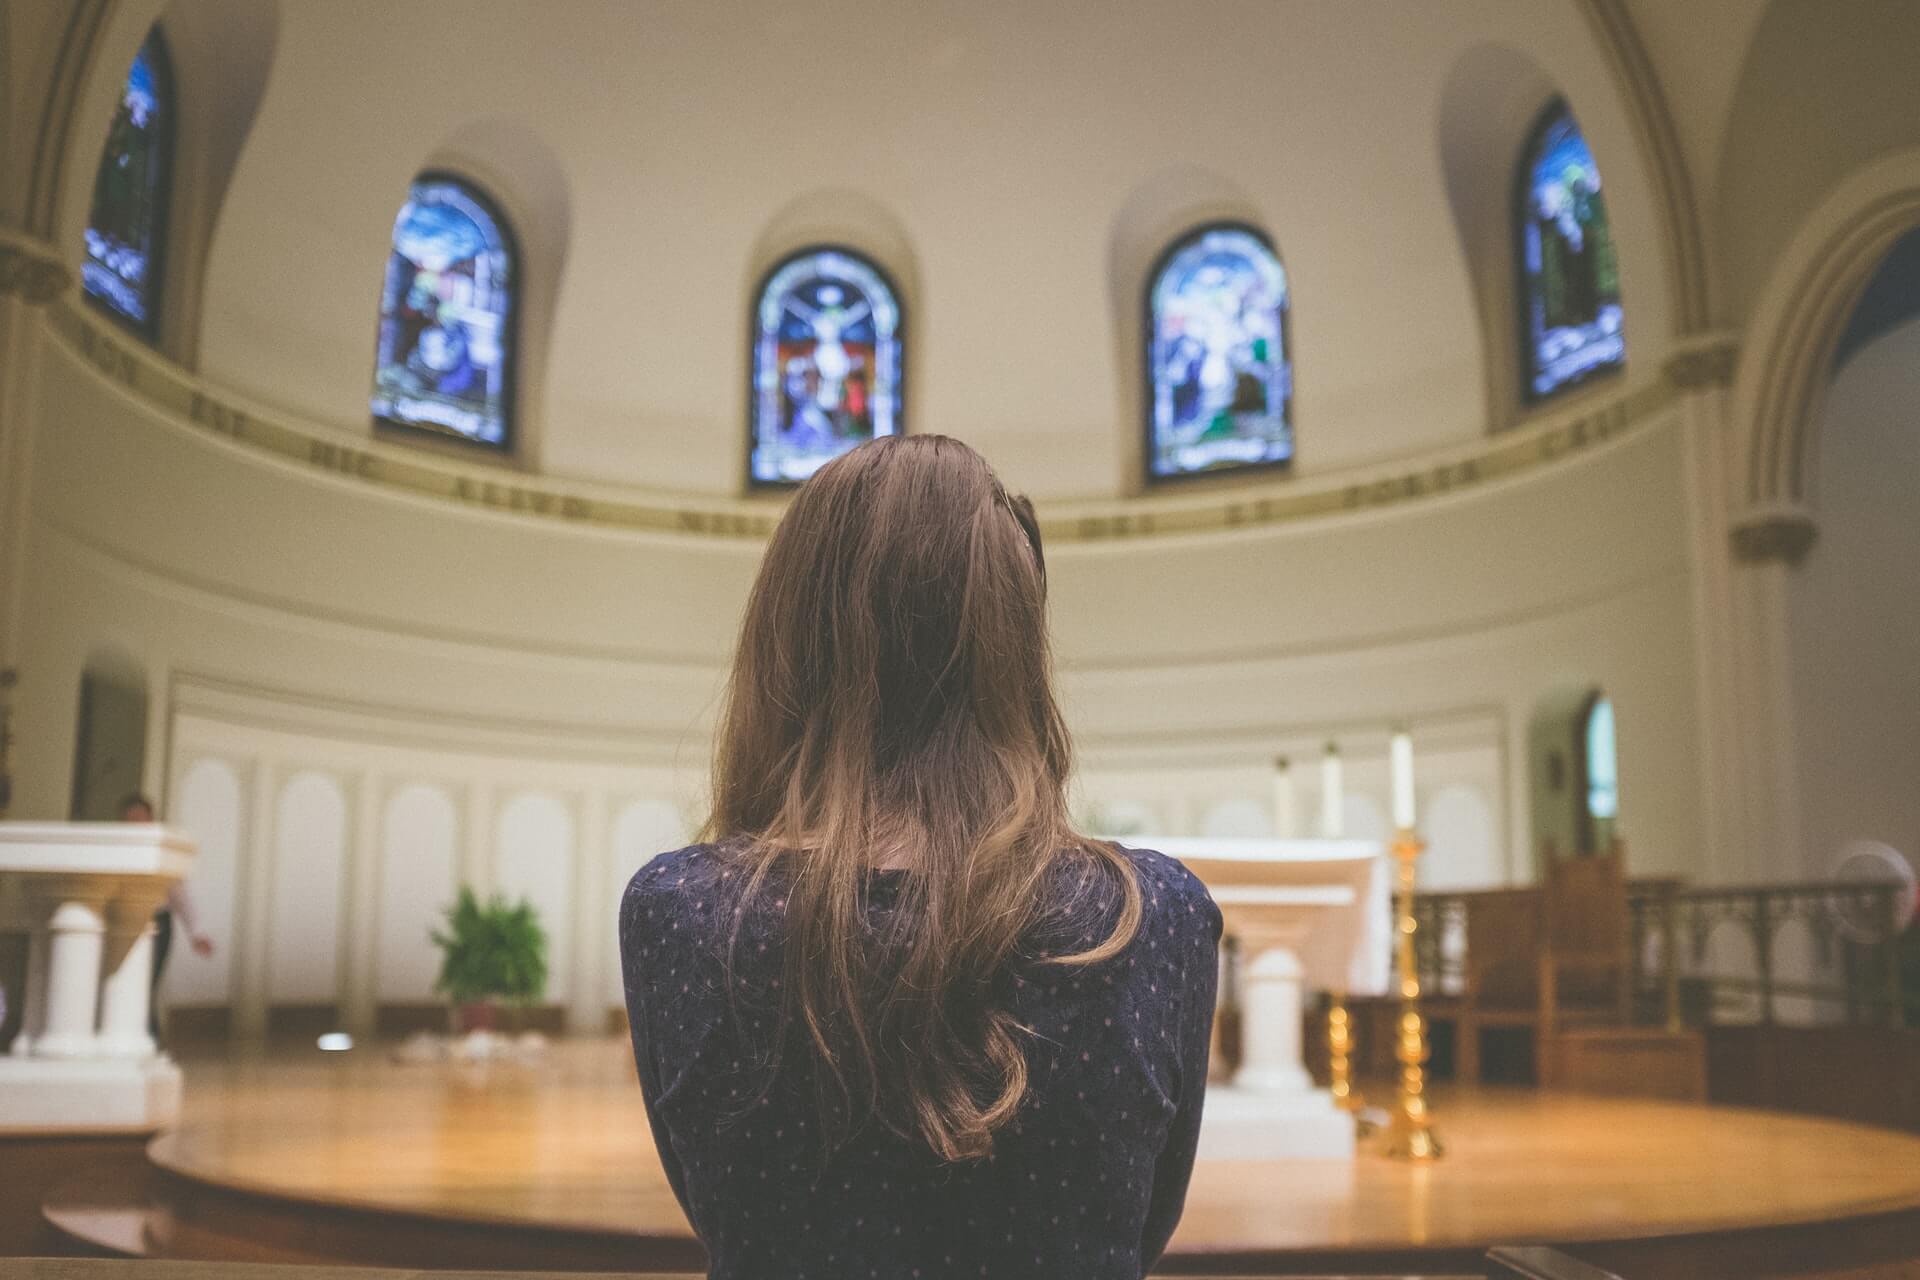 Catholic scholarship recipient stands in a church and looks at stained glass windows